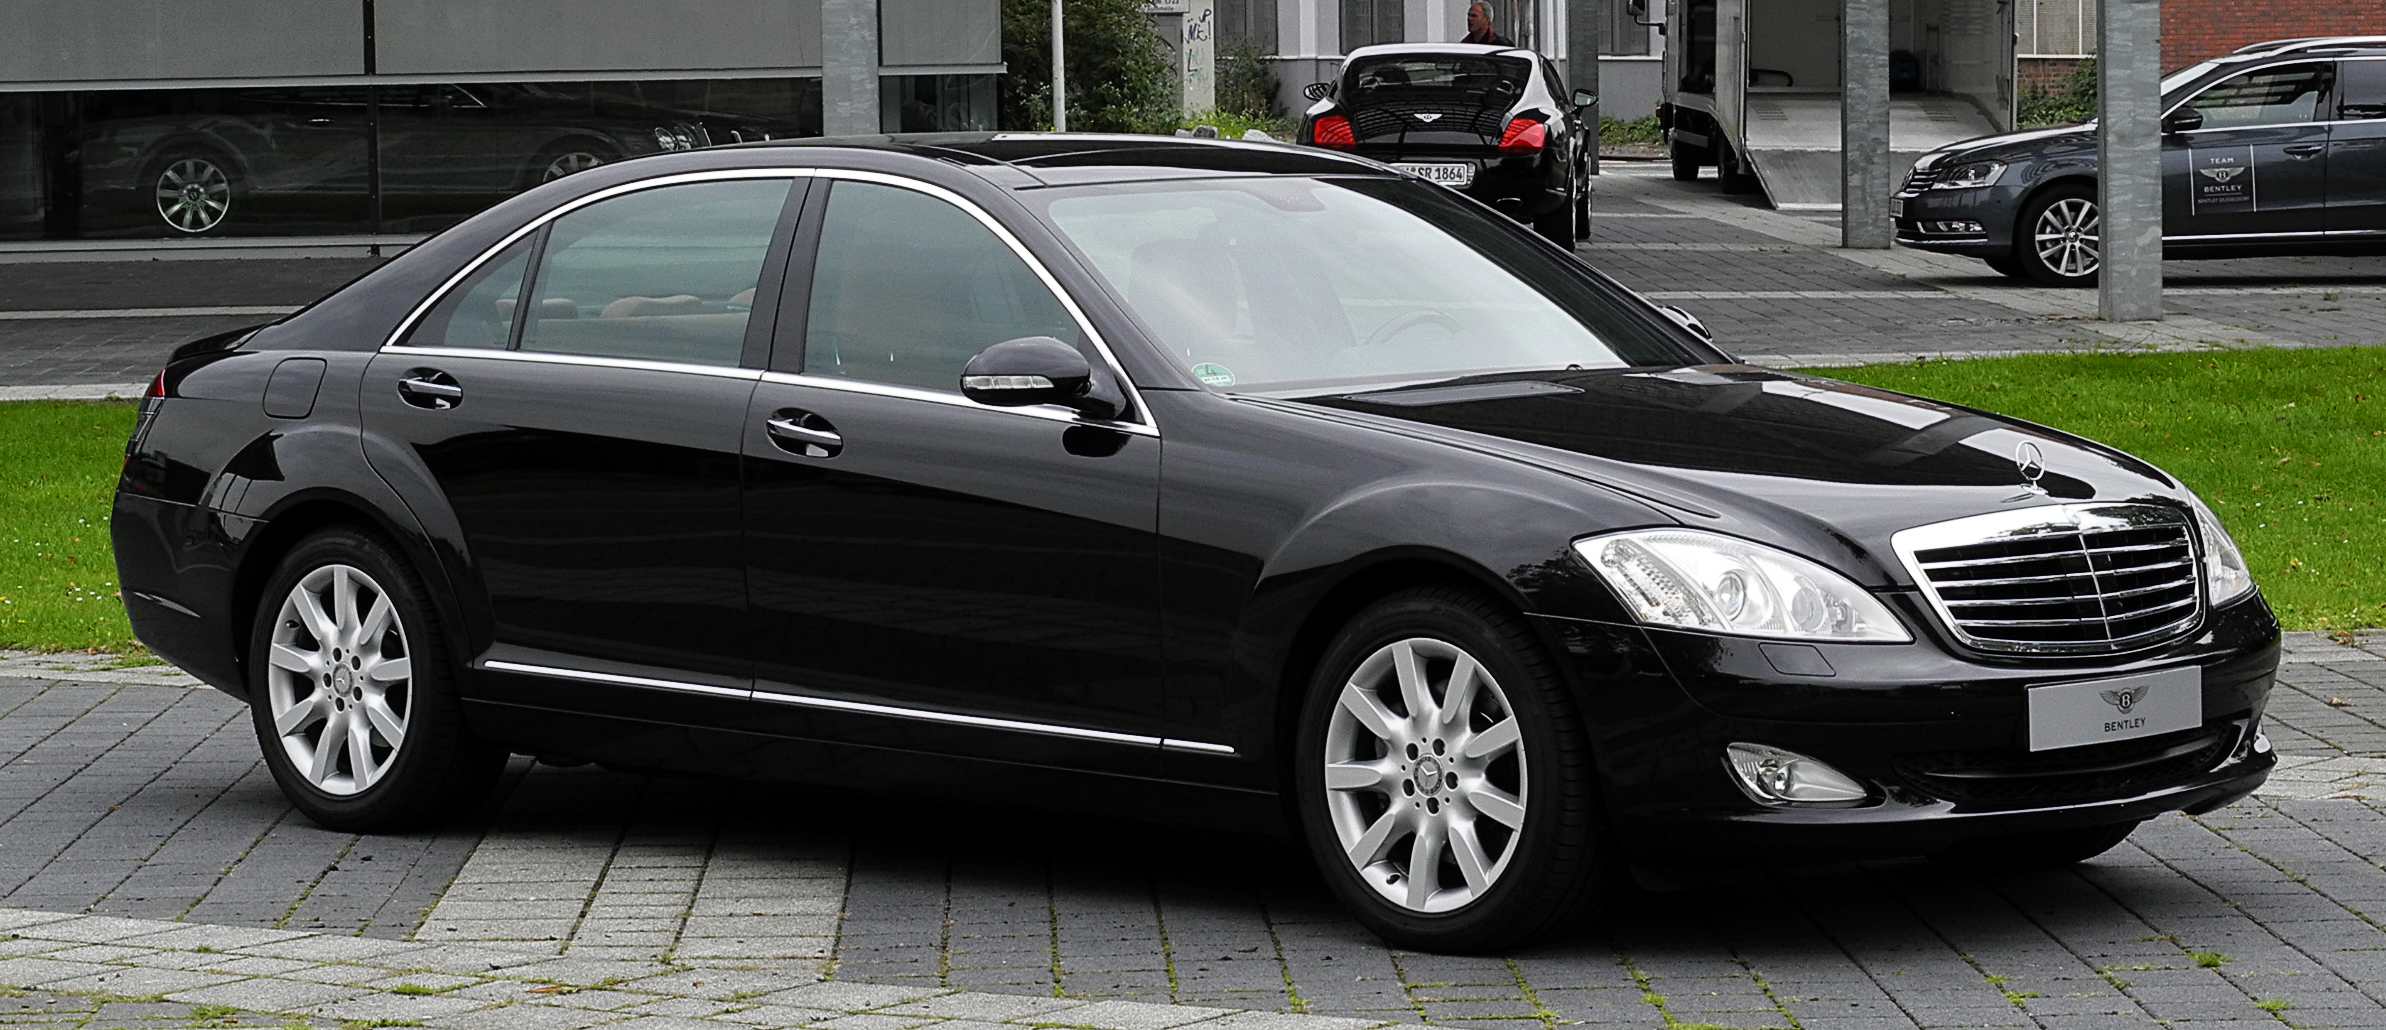 Mercedes-Benz E 320 CDI 4MATIC technical details, history, photos on